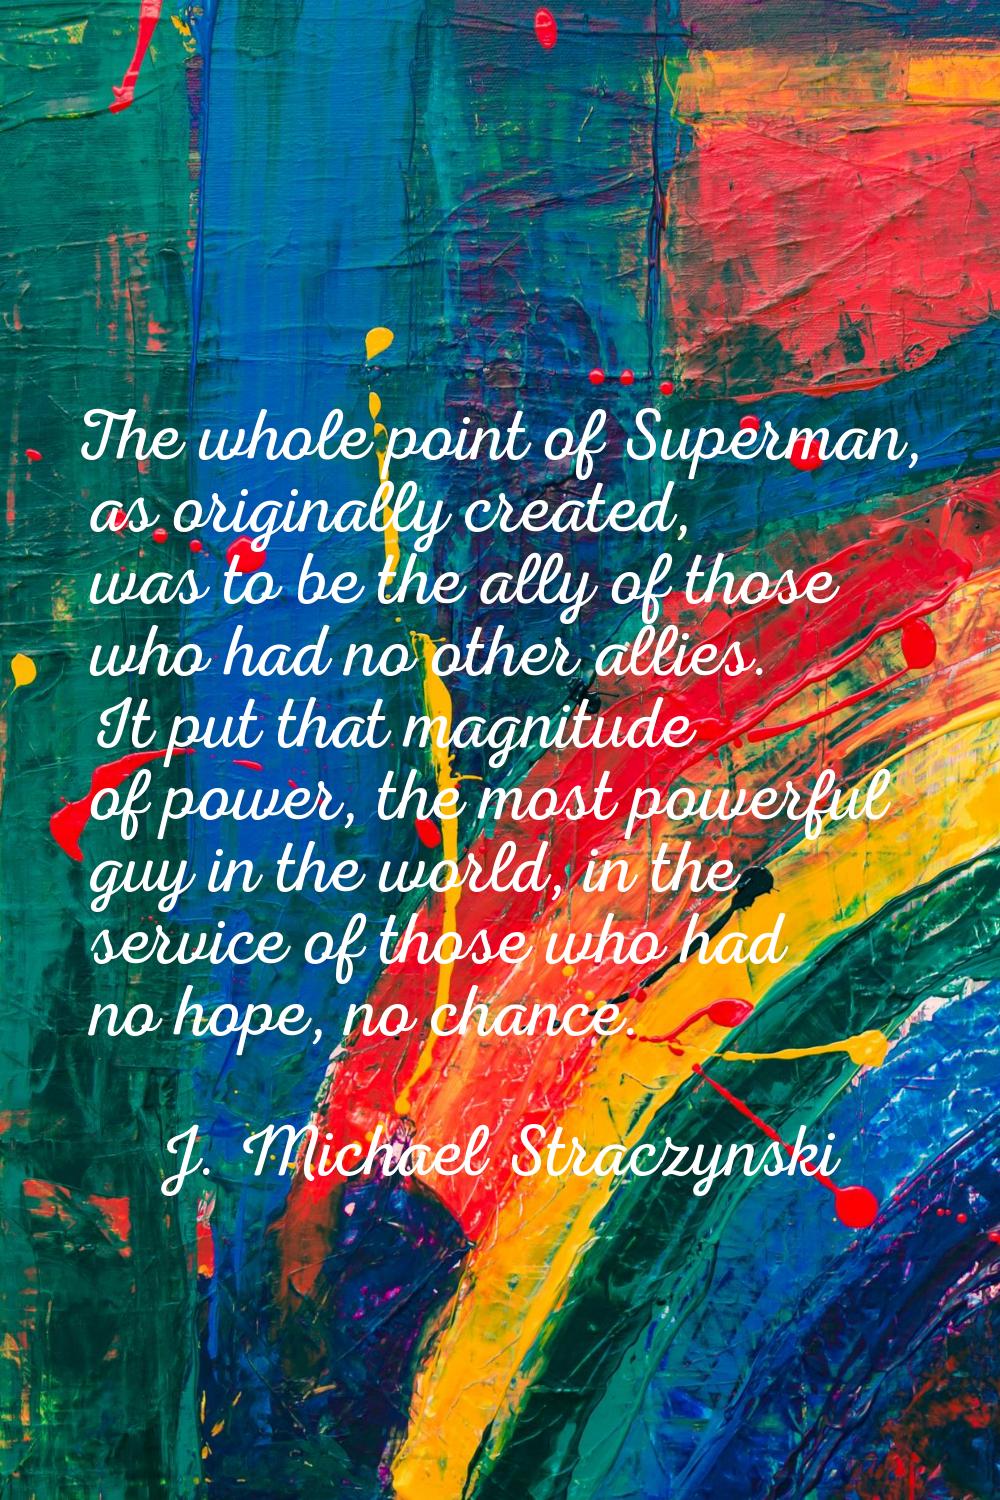 The whole point of Superman, as originally created, was to be the ally of those who had no other al